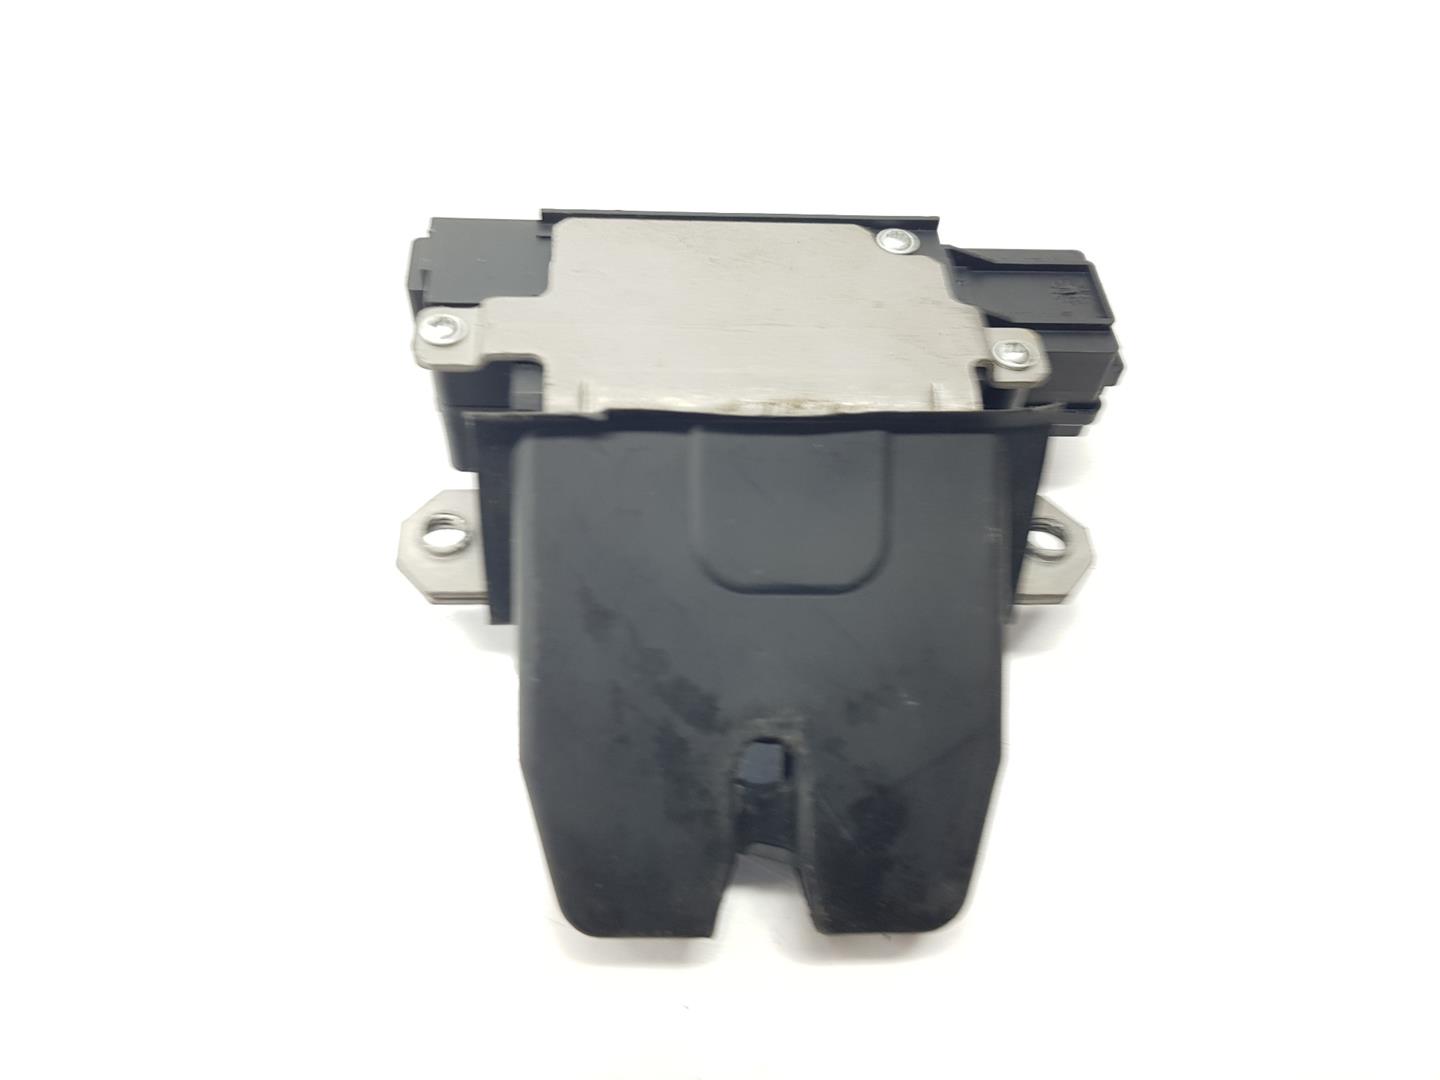 FORD S-Max 1 generation (2006-2015) Tailgate Boot Lock 1570448, 8M51R442A66AC 19863464